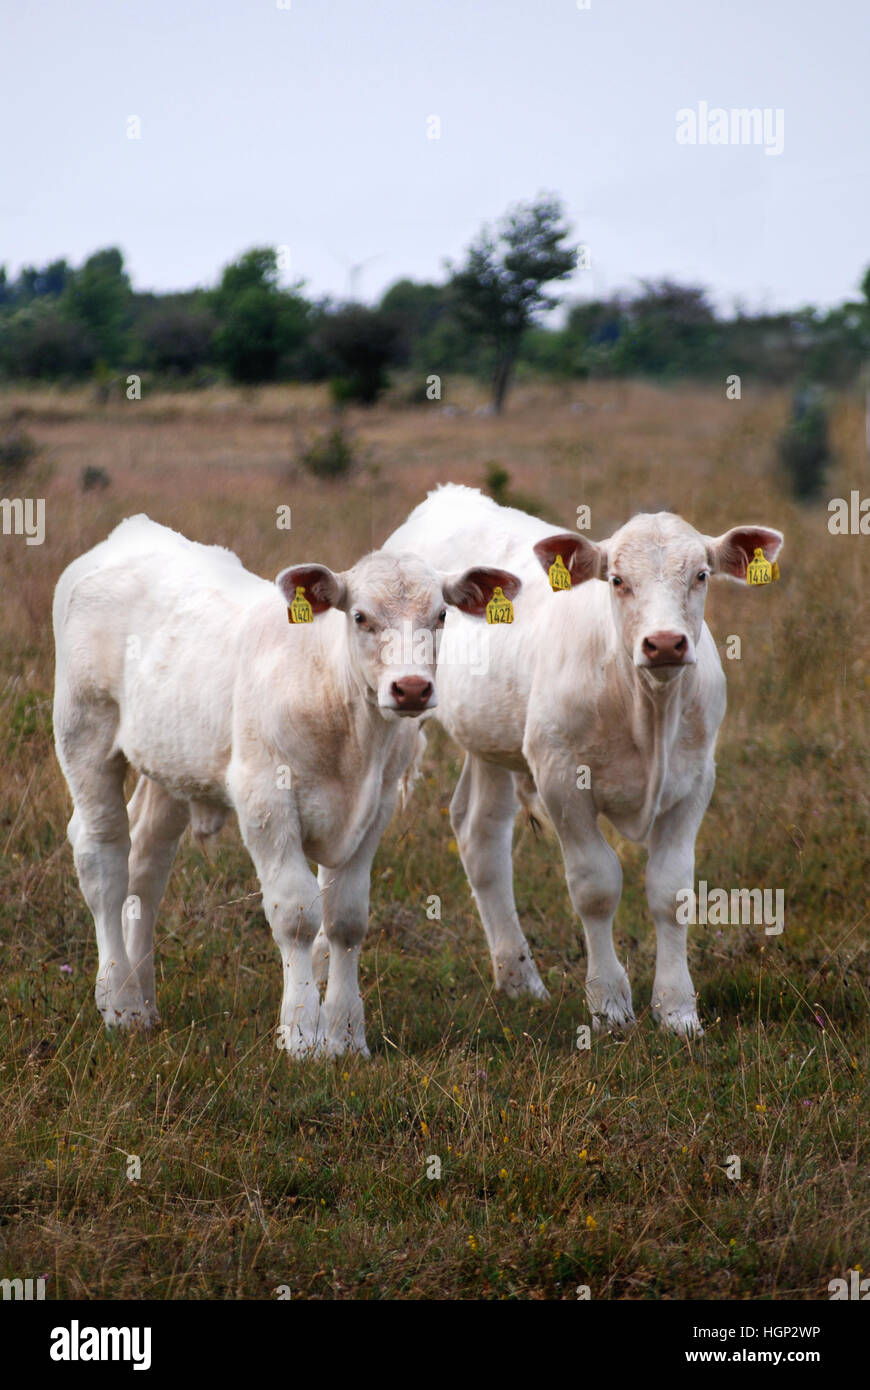 Two young curious cows in a pasture Stock Photo